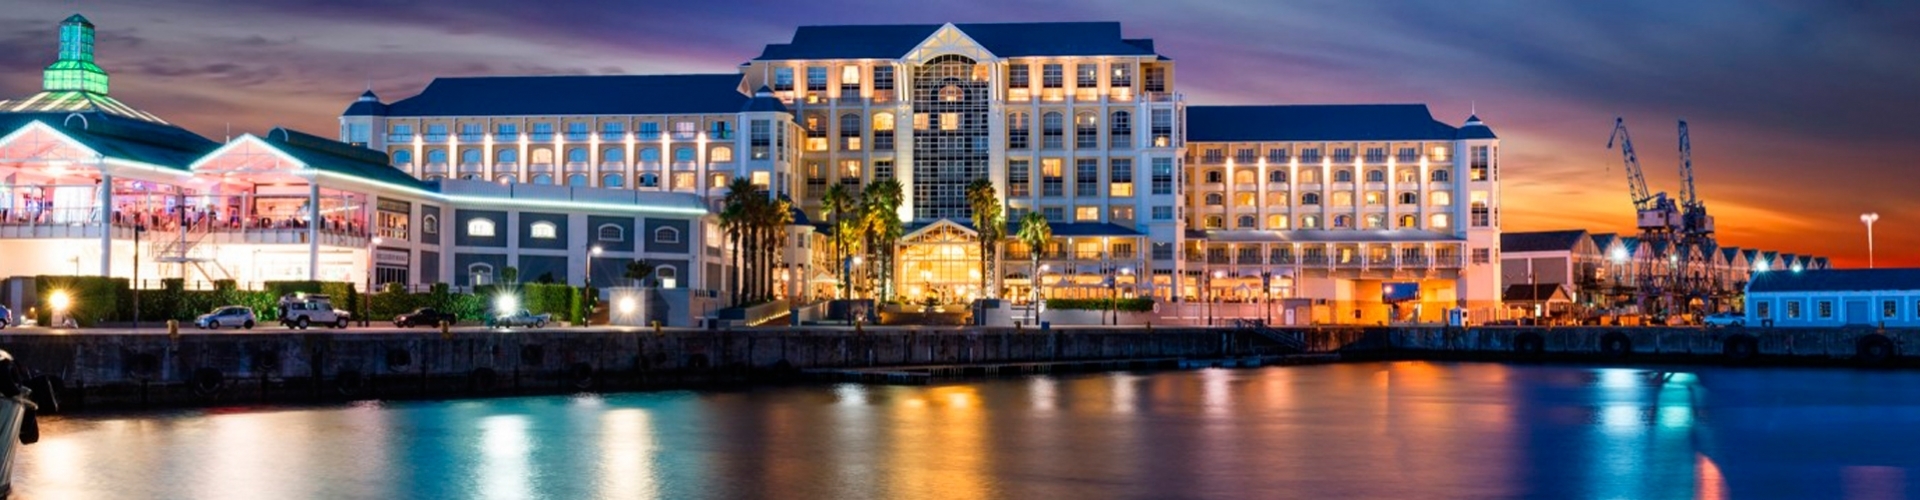 the-table-bay-hotel-header-